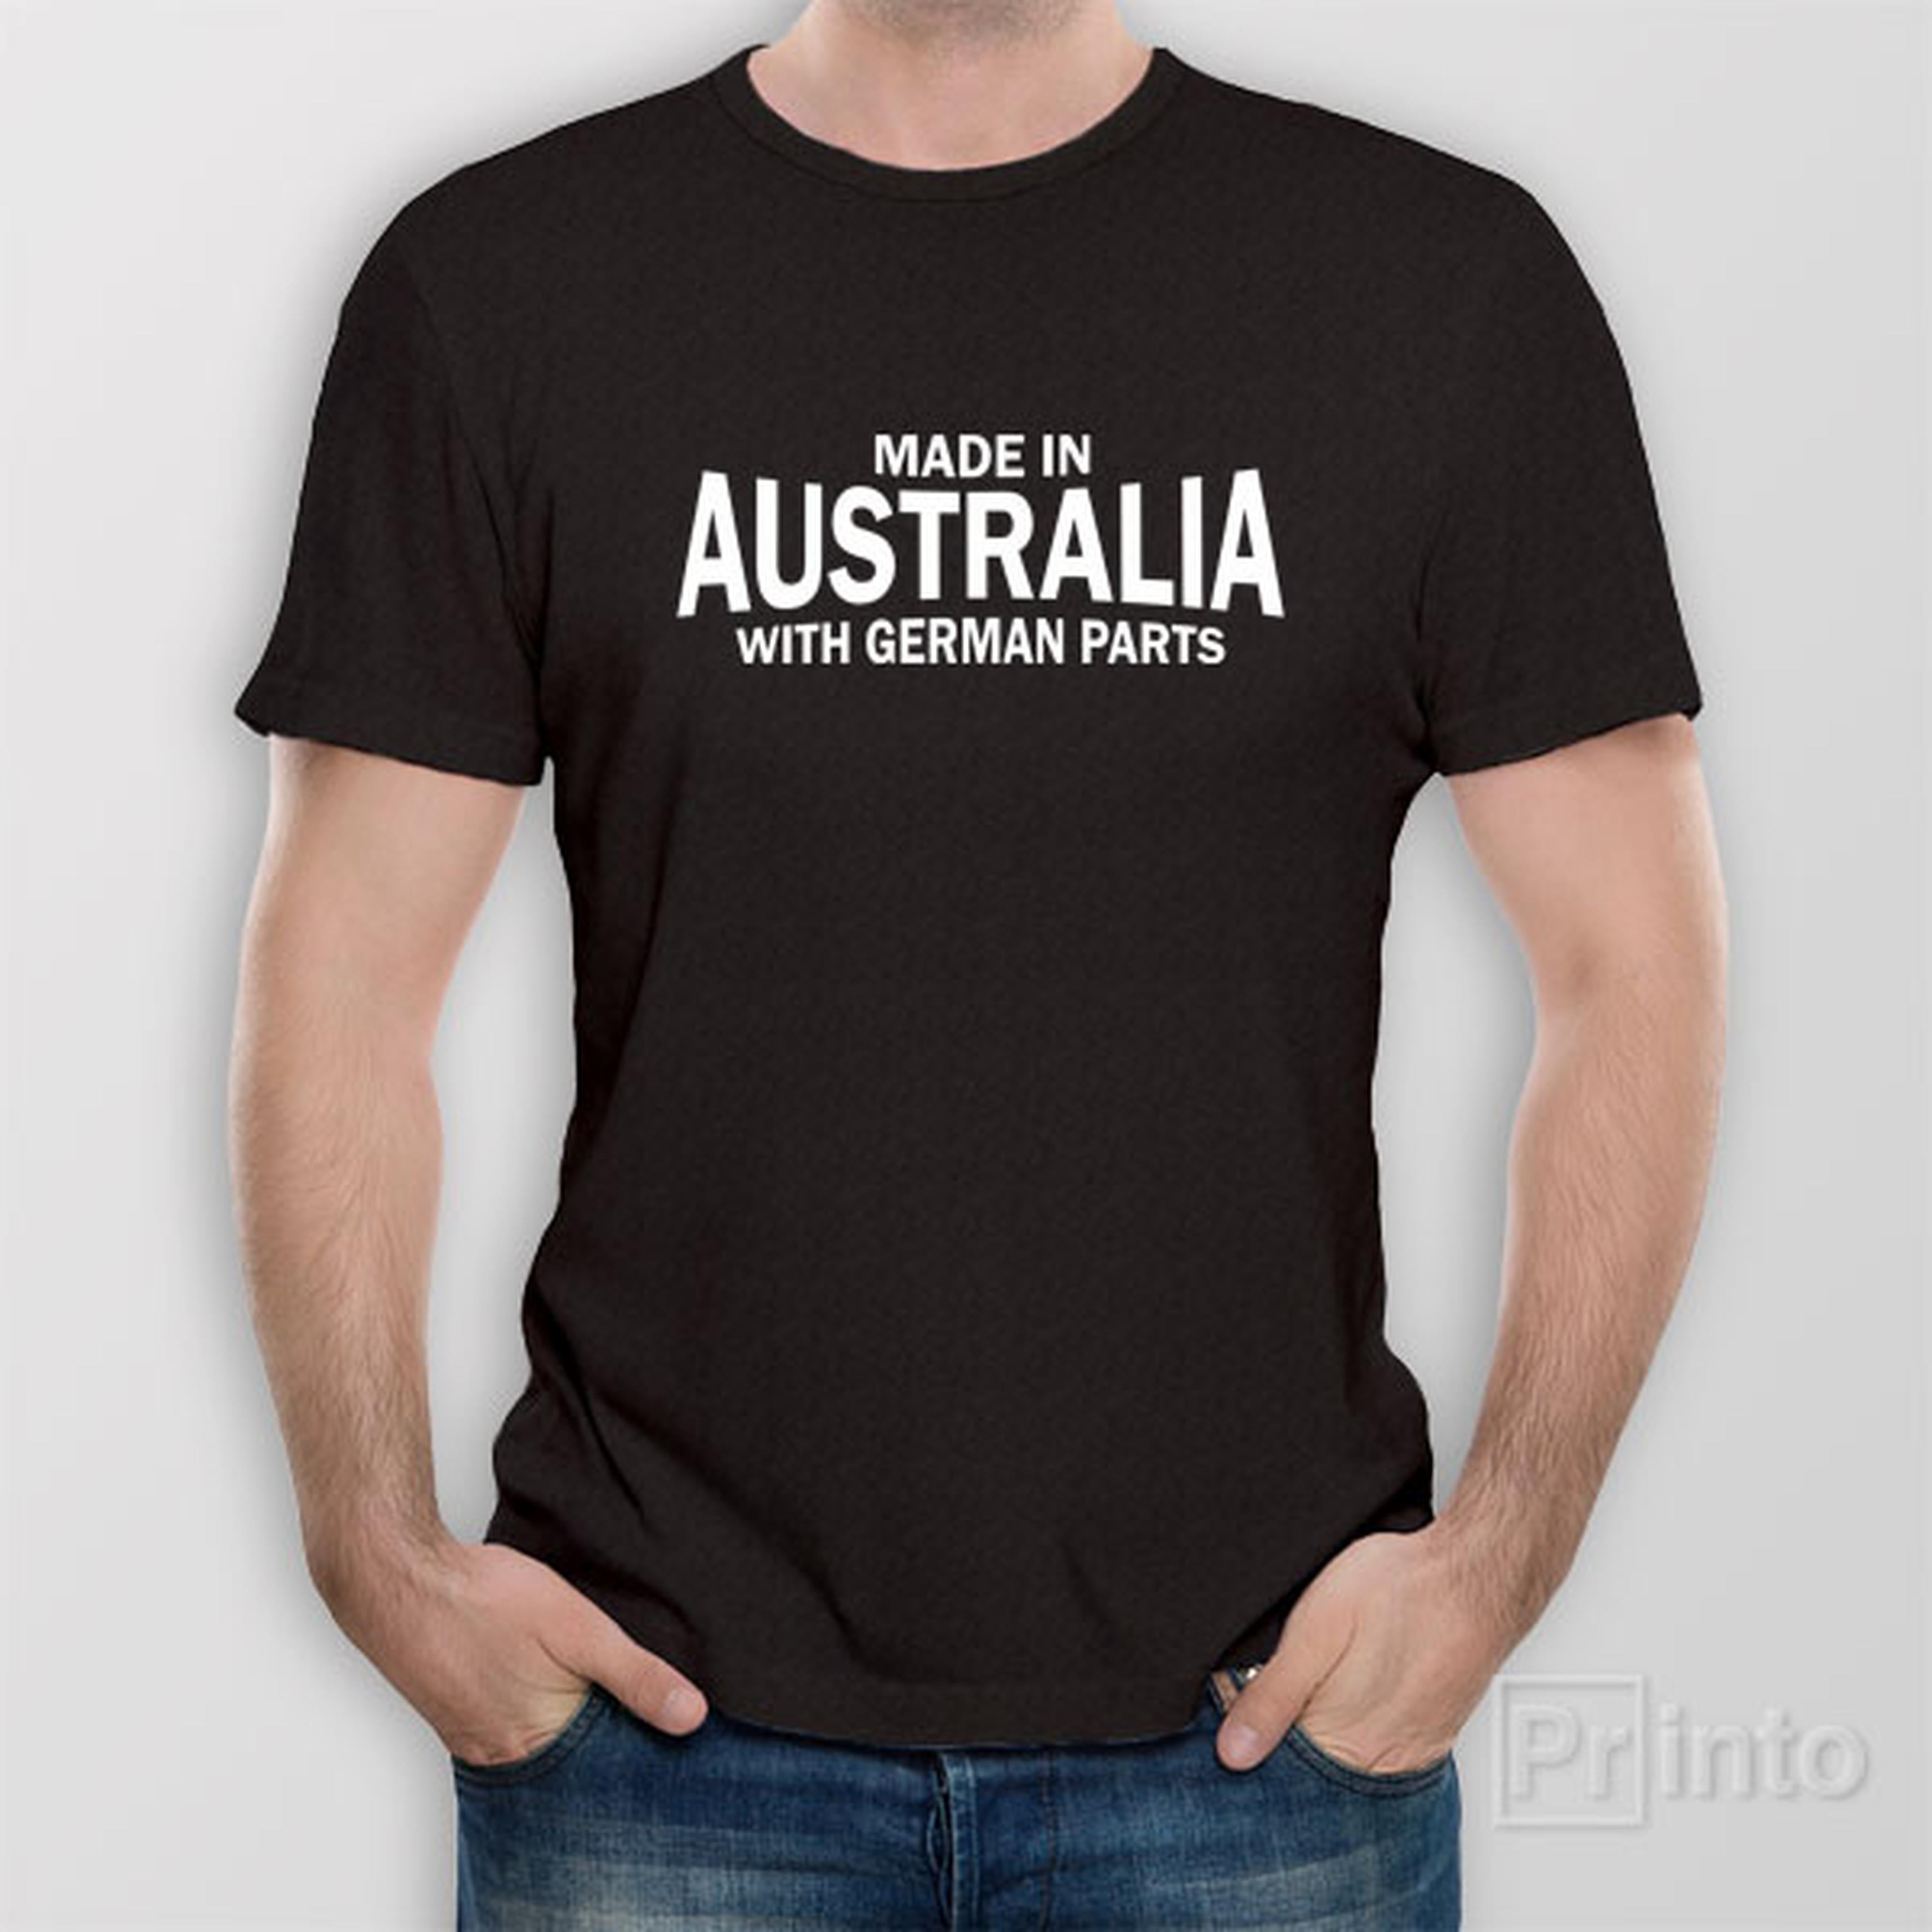 made-in-australia-with-german-parts-t-shirt